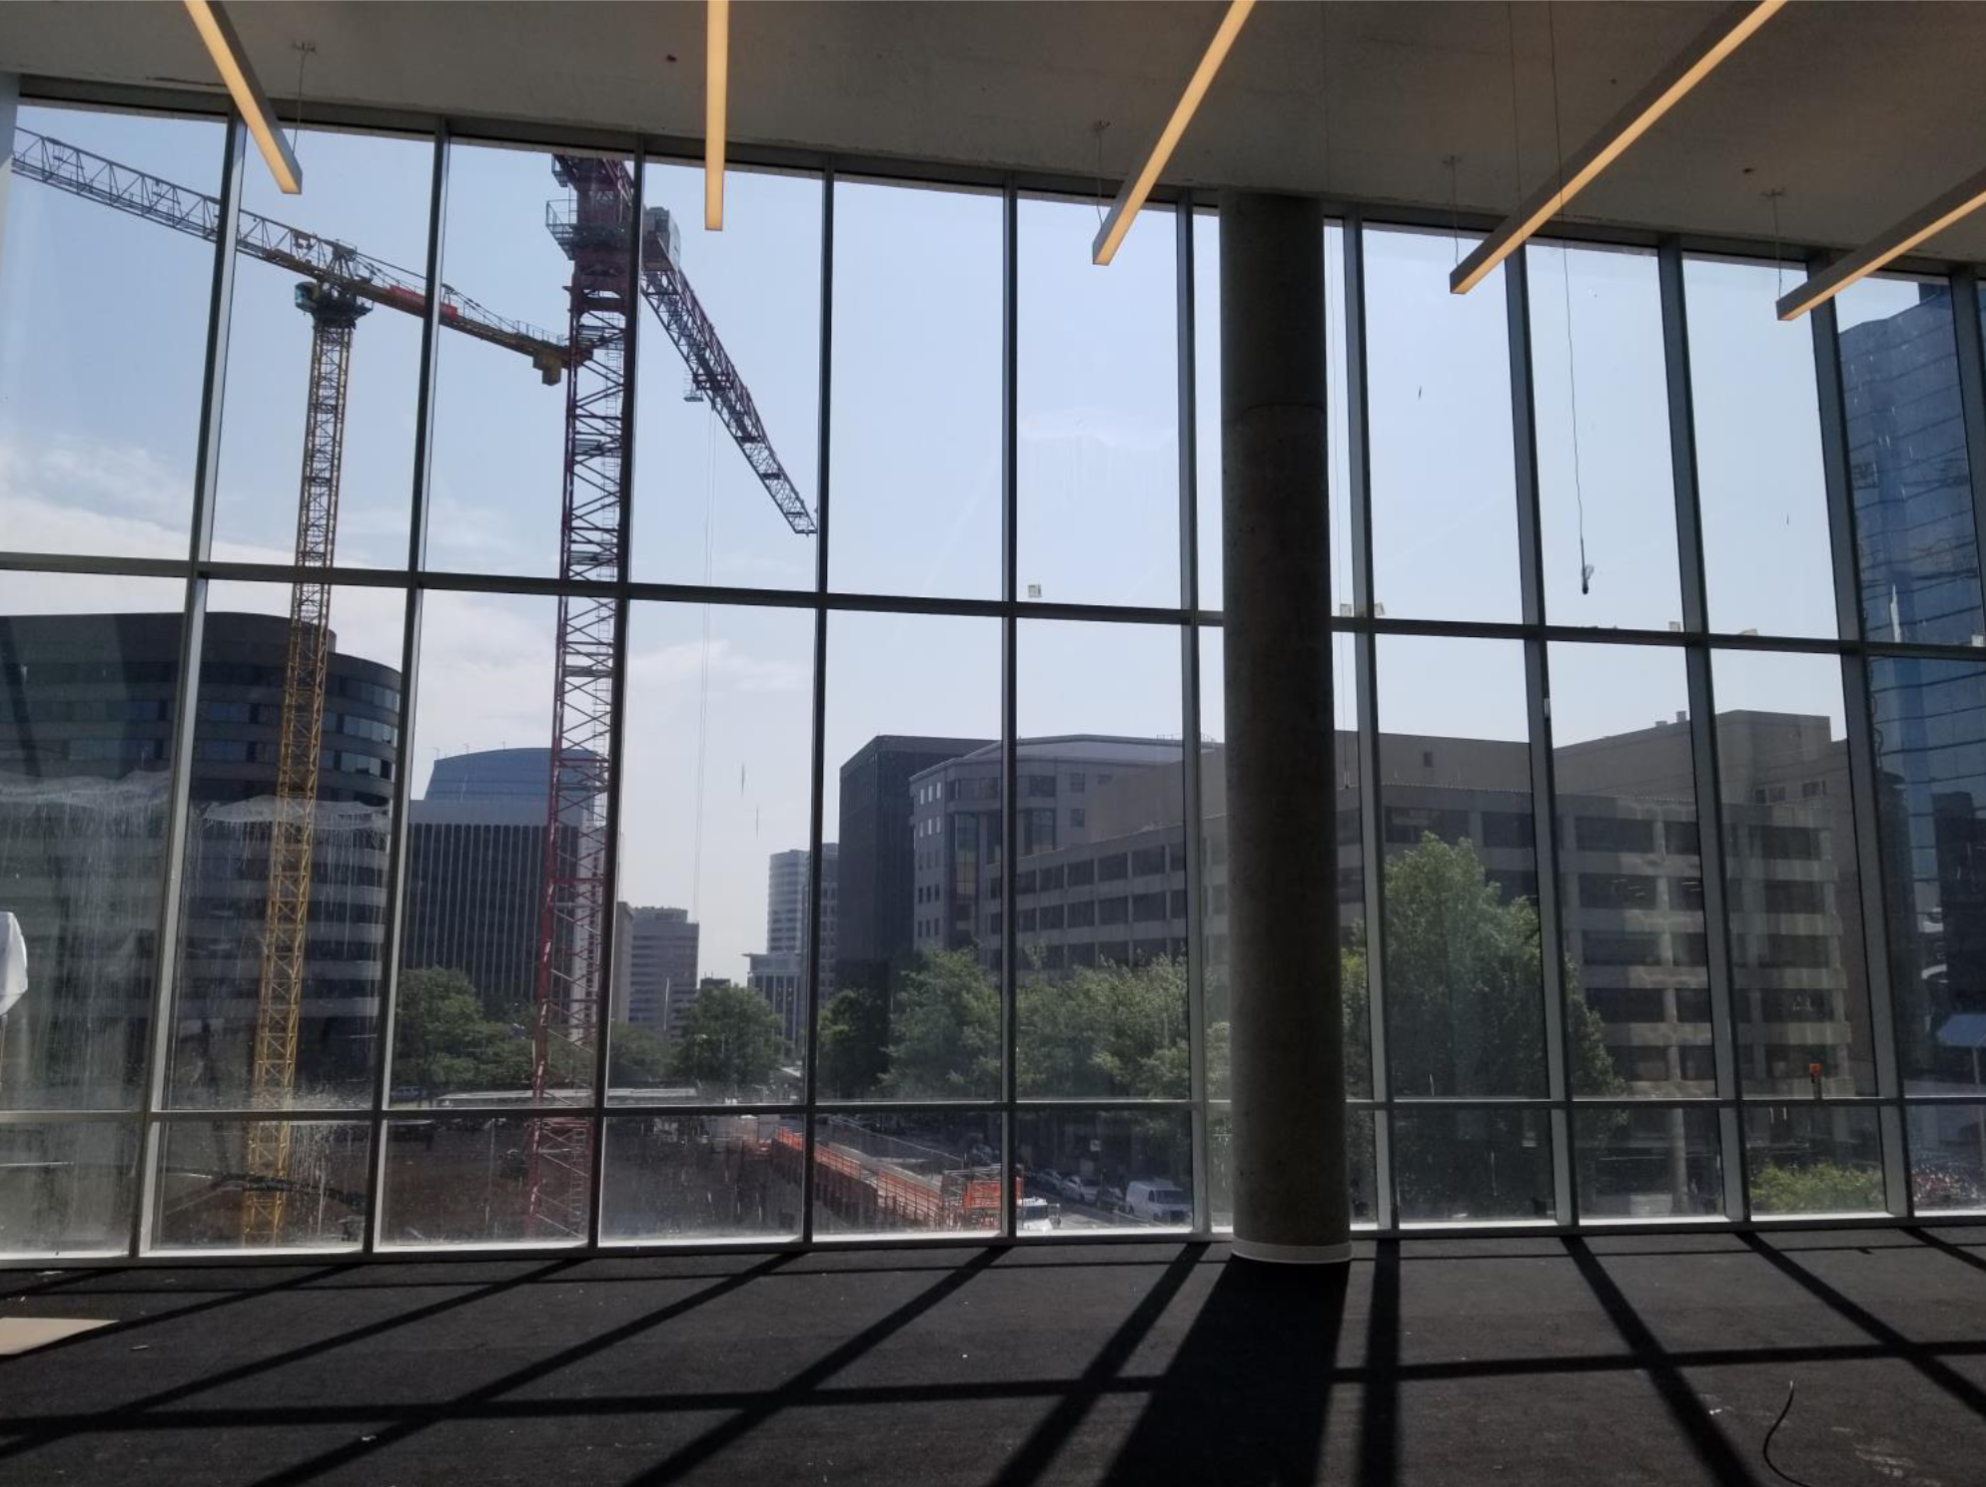 construction cranes from inside the music room of the Heights Building